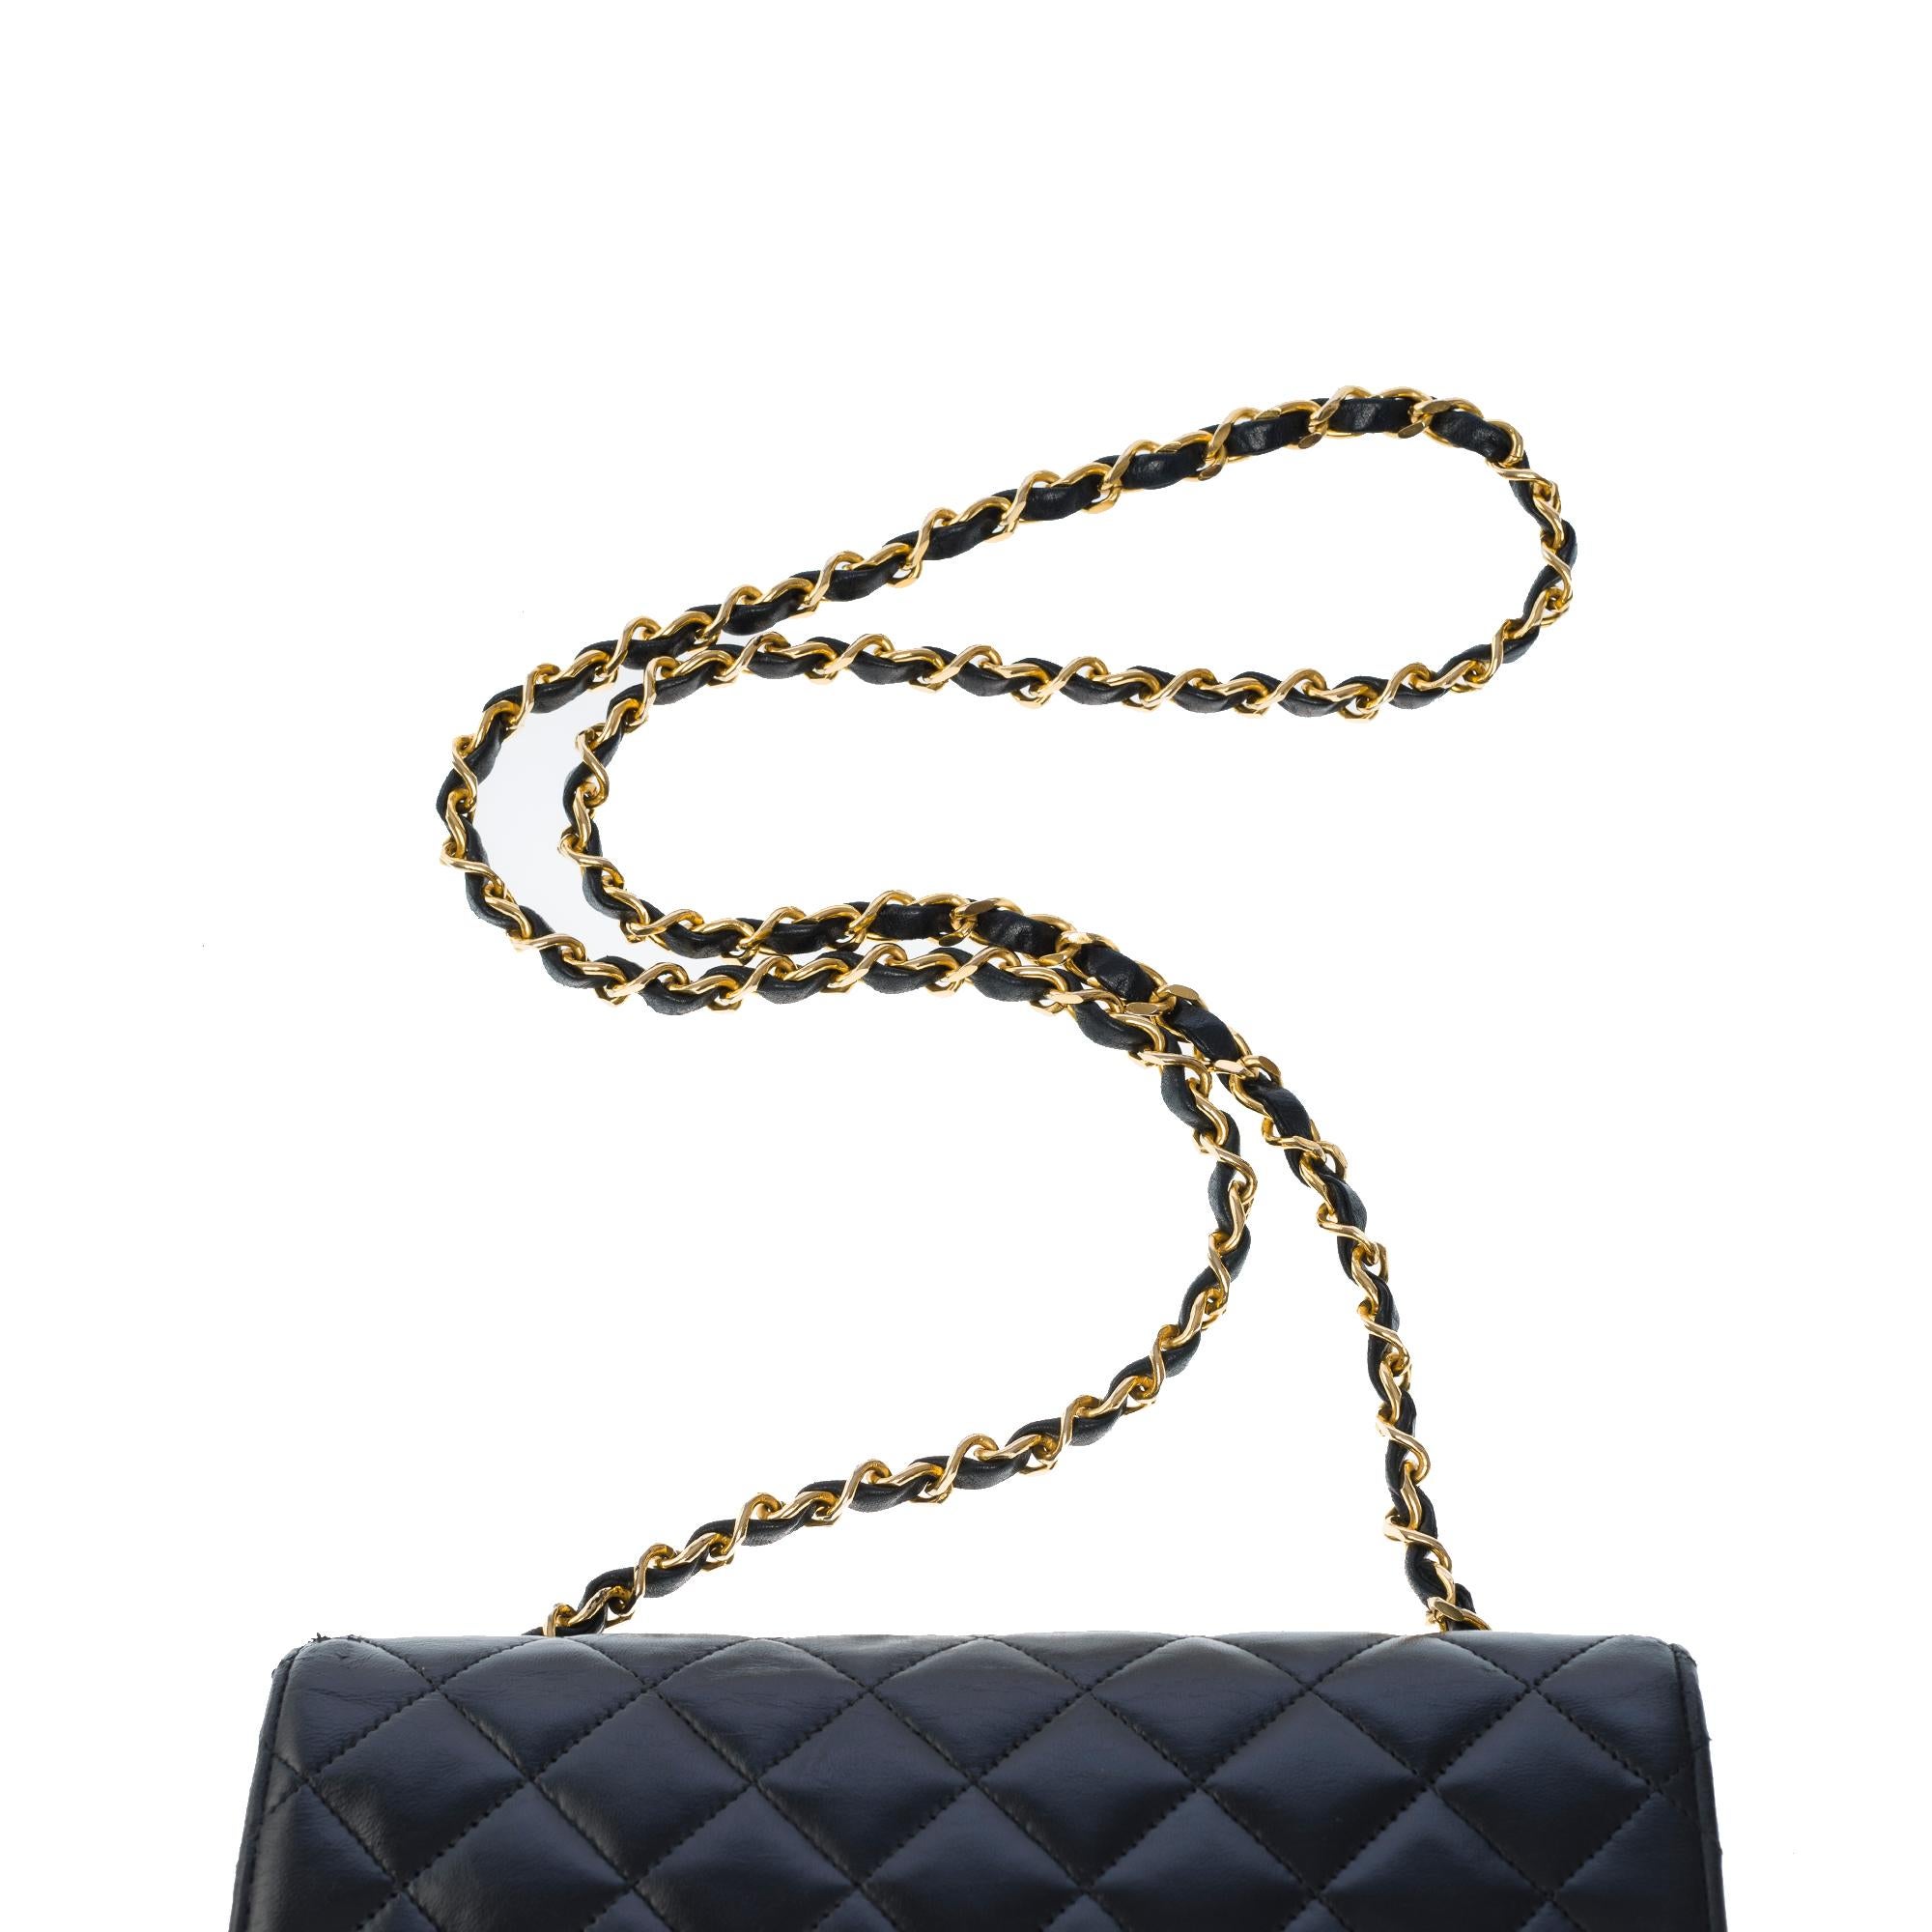 Chanel Classic Full Flap shoulder bag in black quilted lambskin leather, GHW For Sale 6